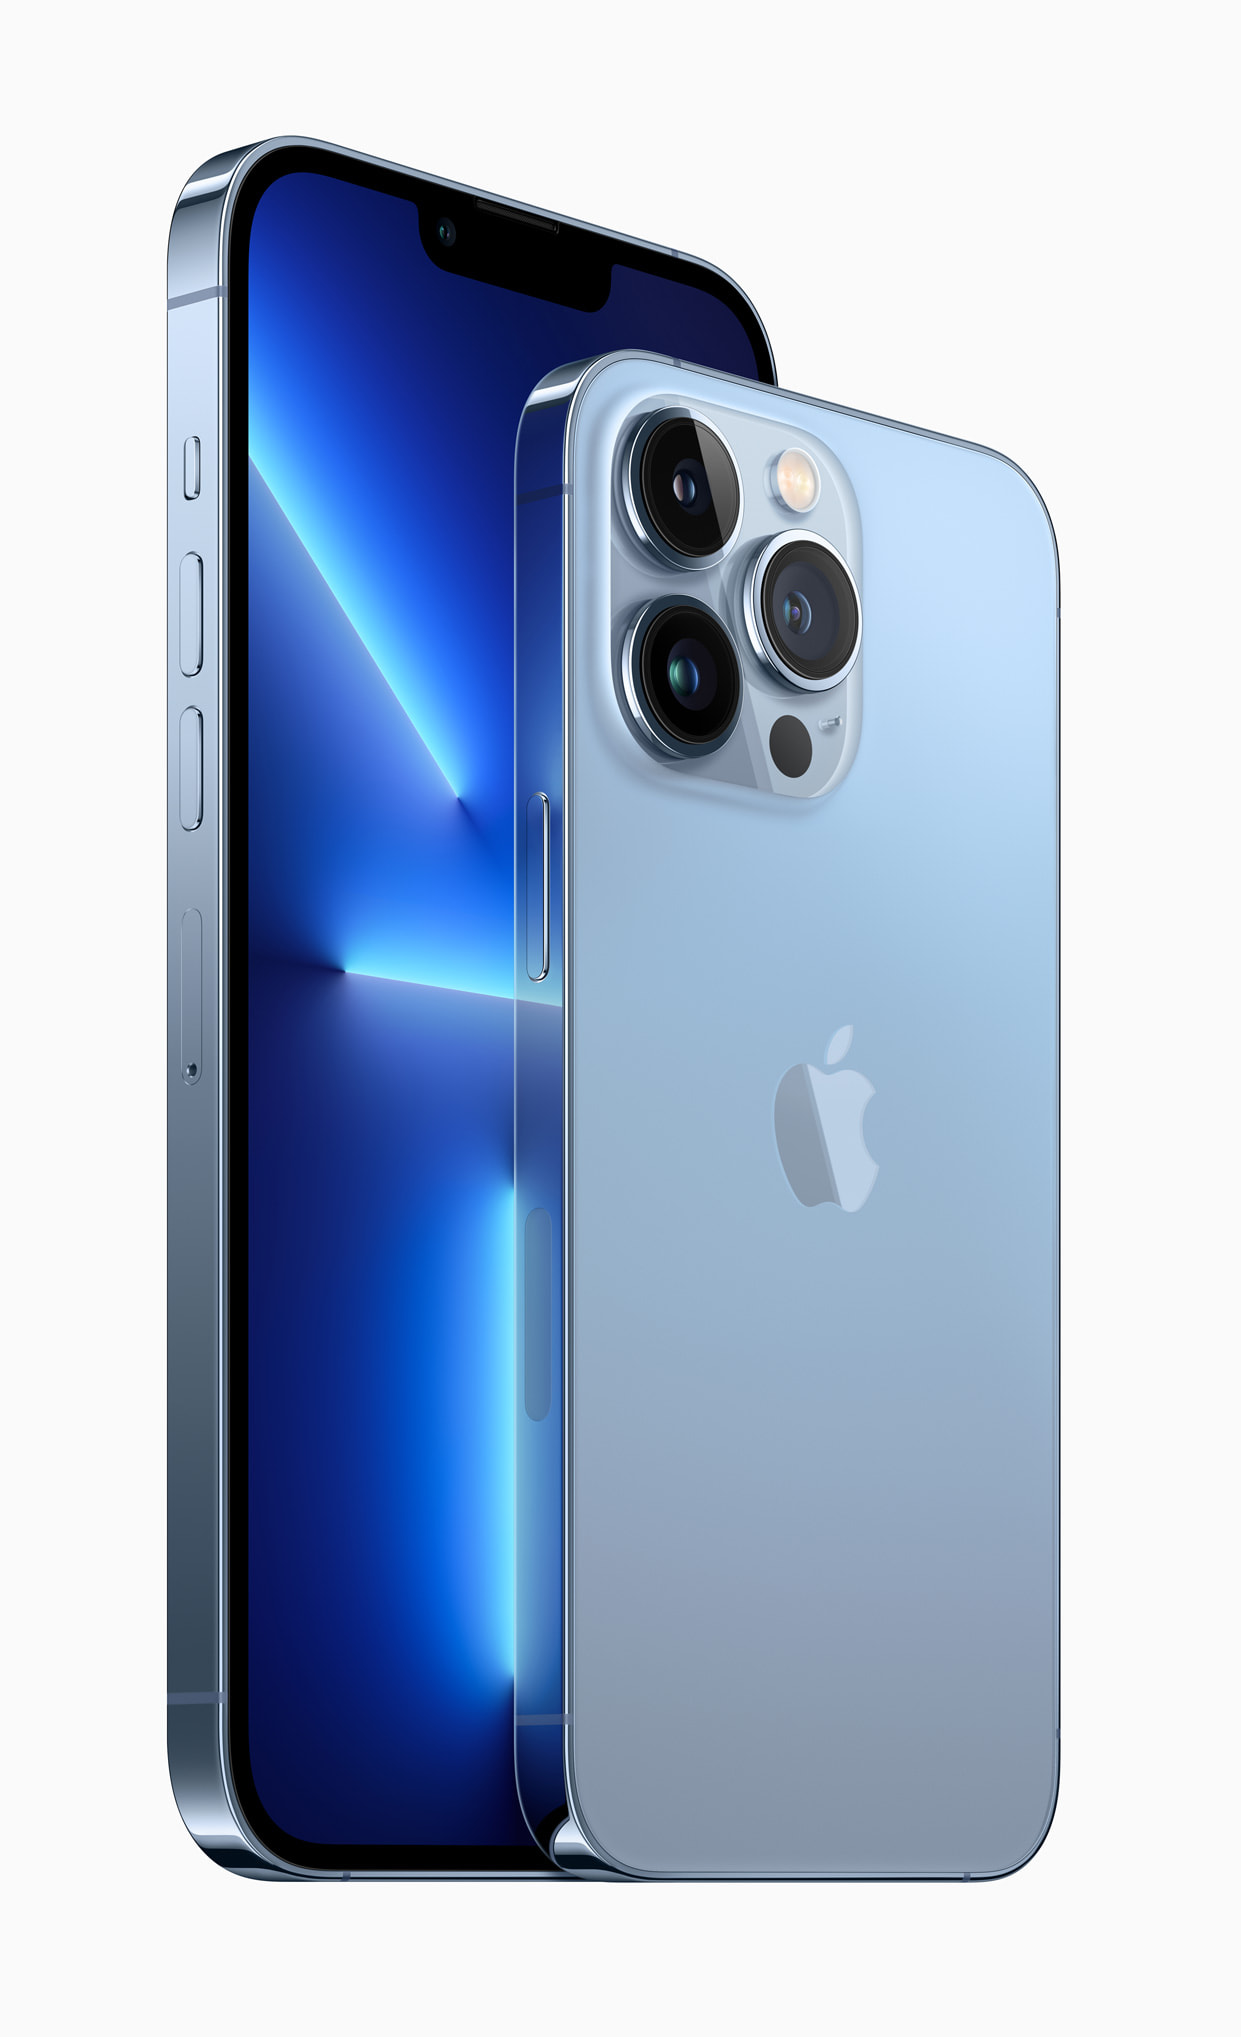 iPhone 11 Pro and iPhone 11 Pro Max: the most powerful and advanced  smartphones - Apple (IE)